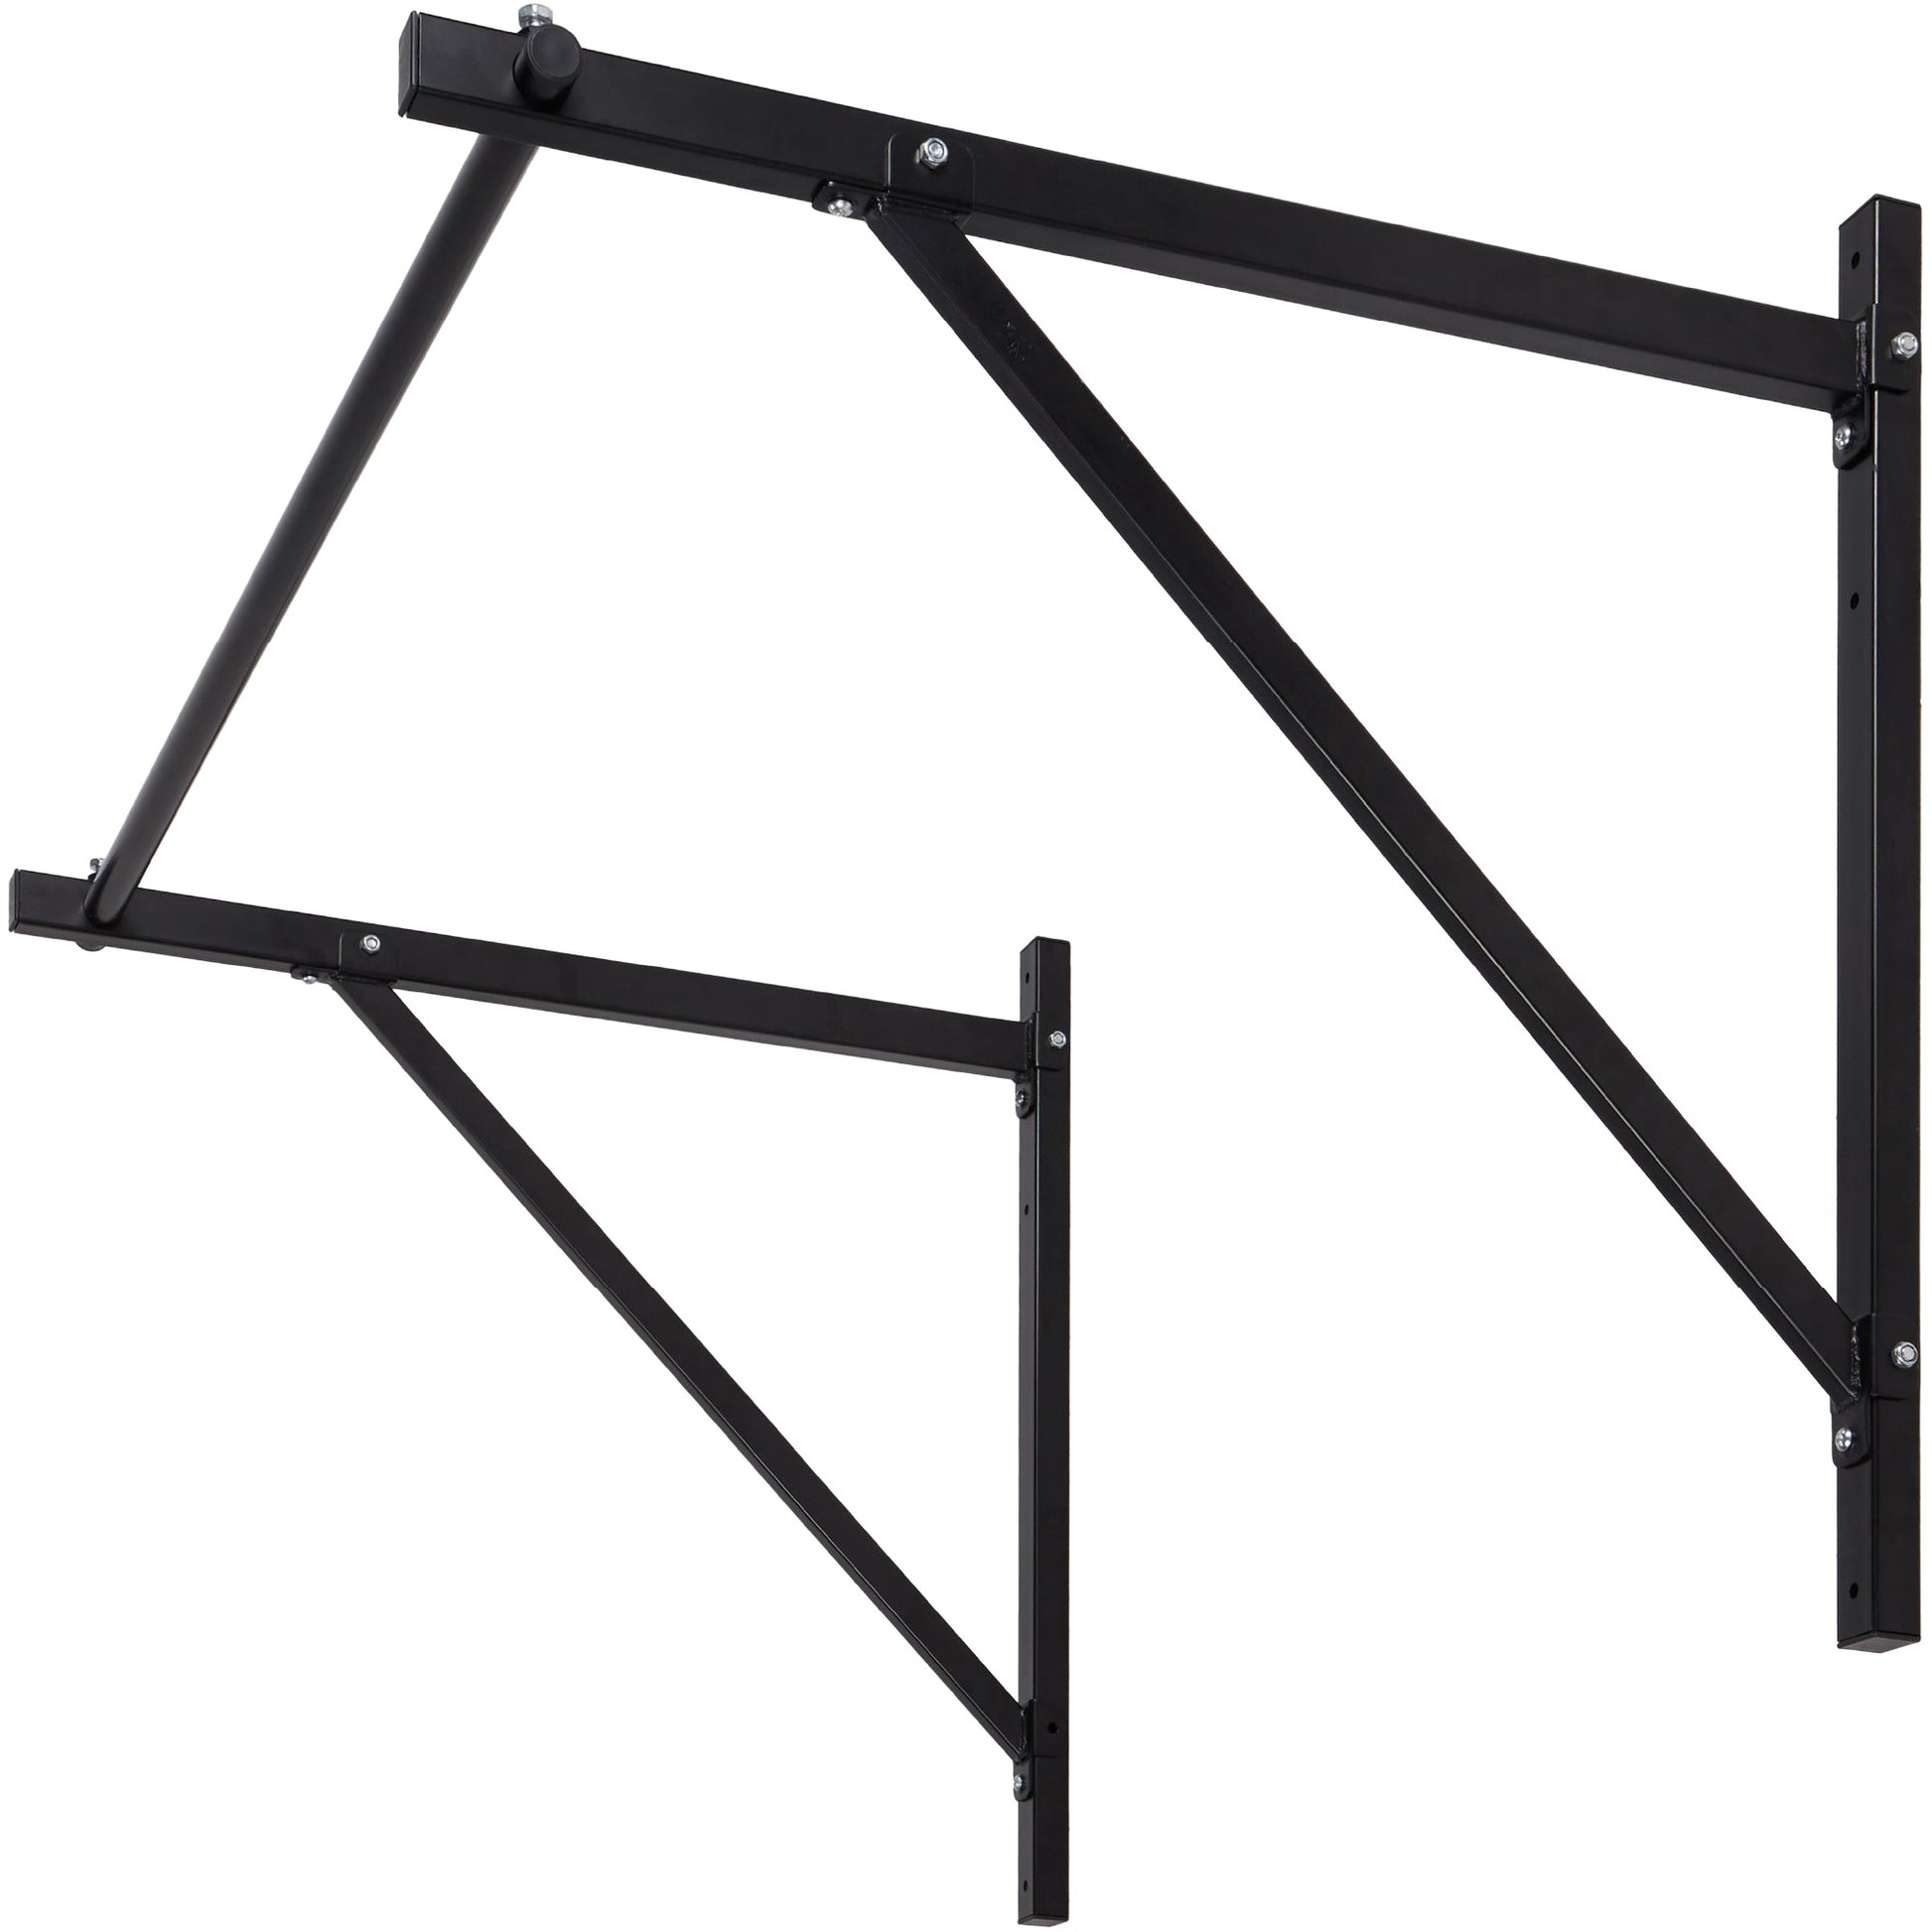 Wall-Mounted Home Gym Fitness Workout Pull-Up Bar/ 330lbs Cap - 50in